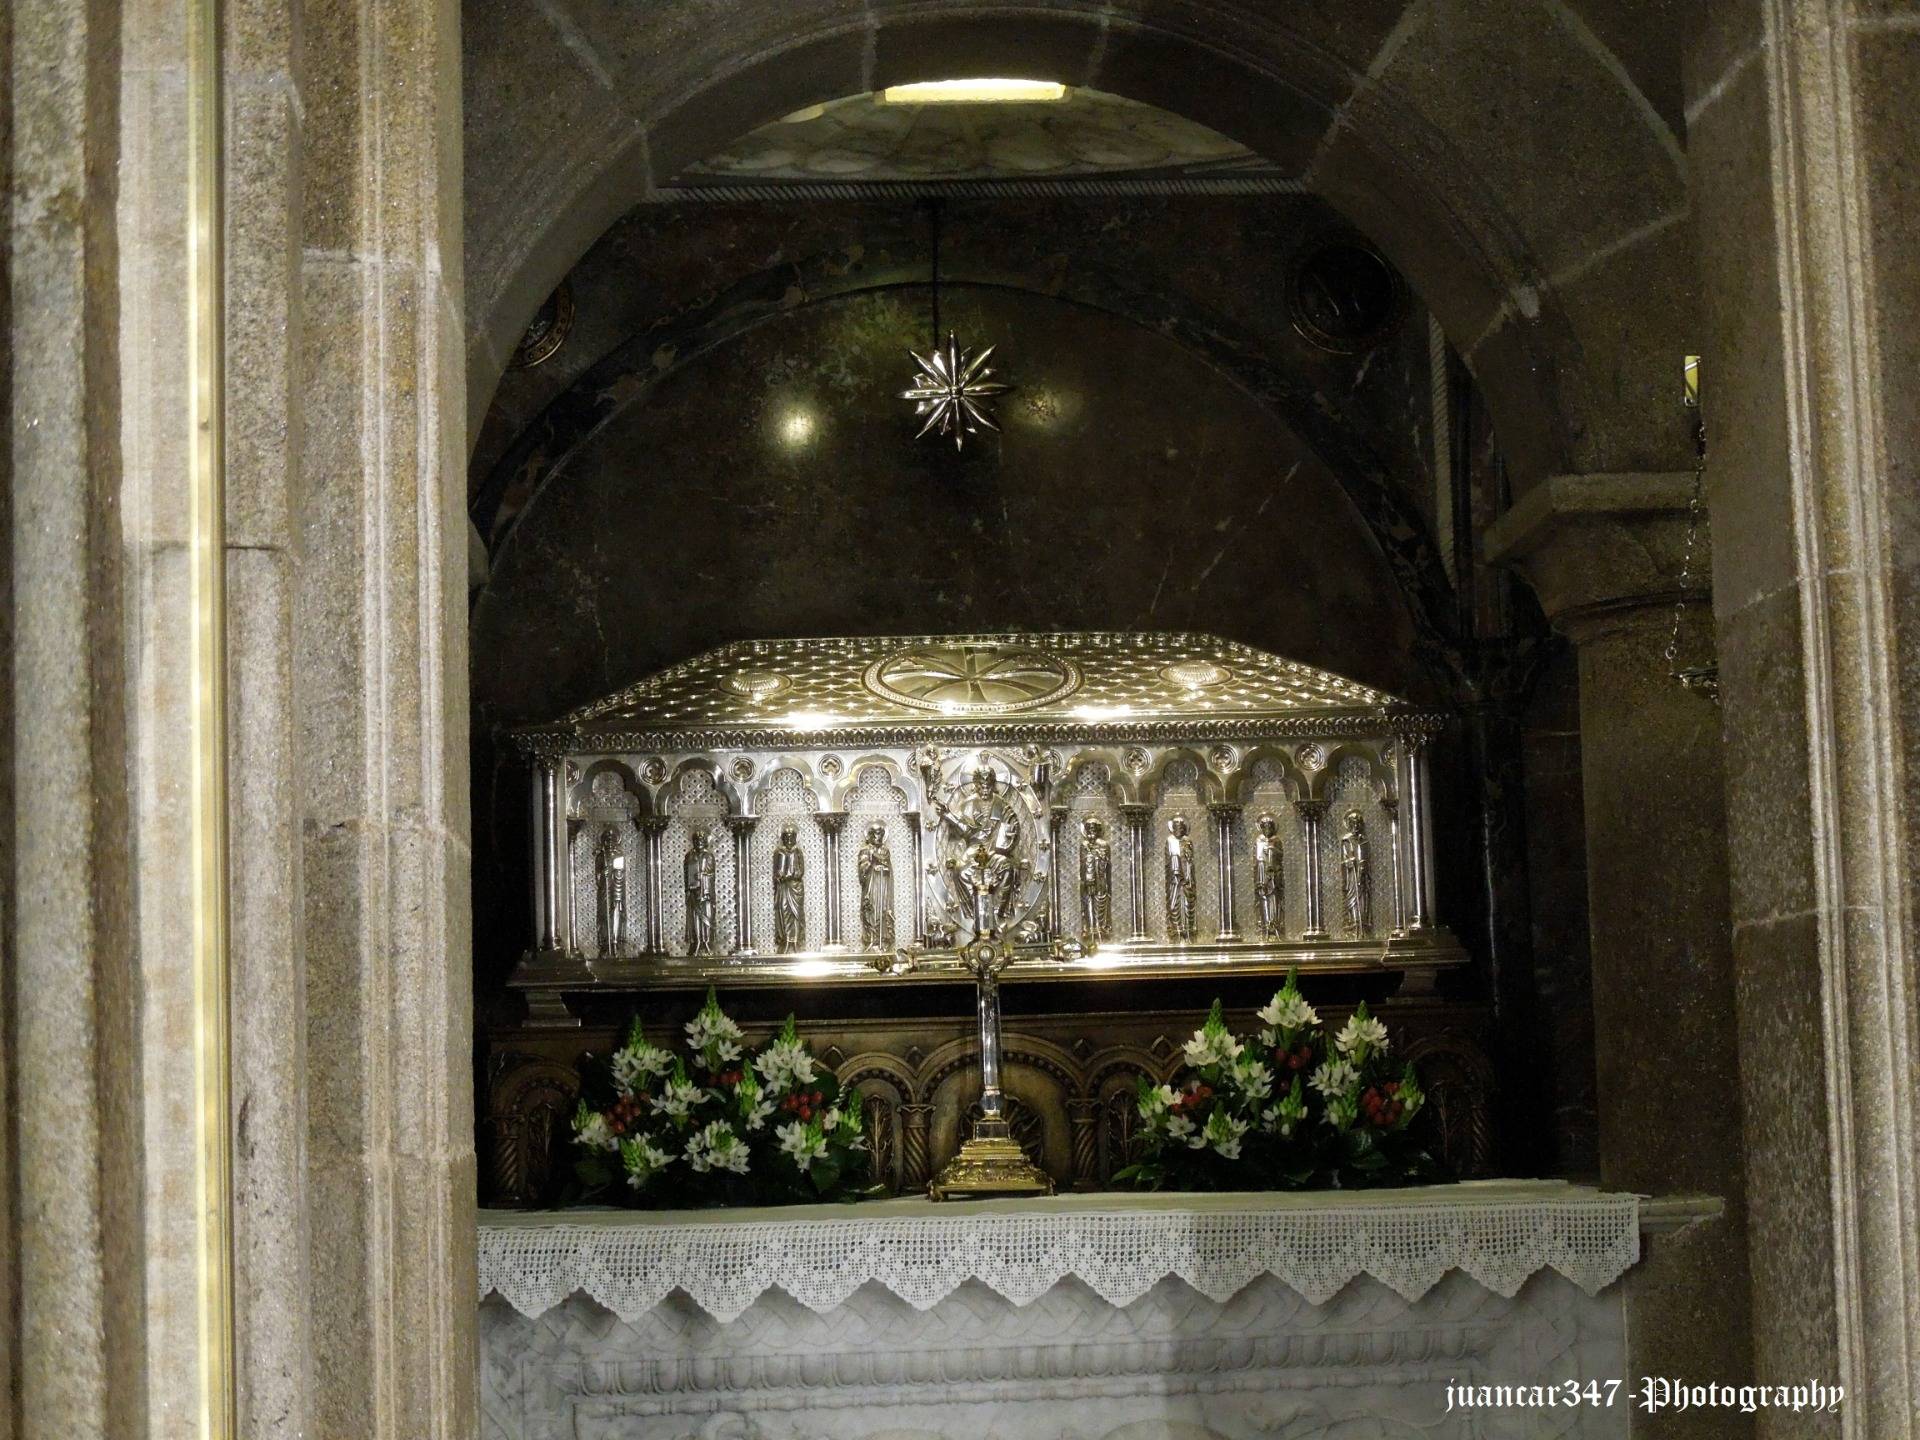 The ark with the supposed relics of Saint James the Greater